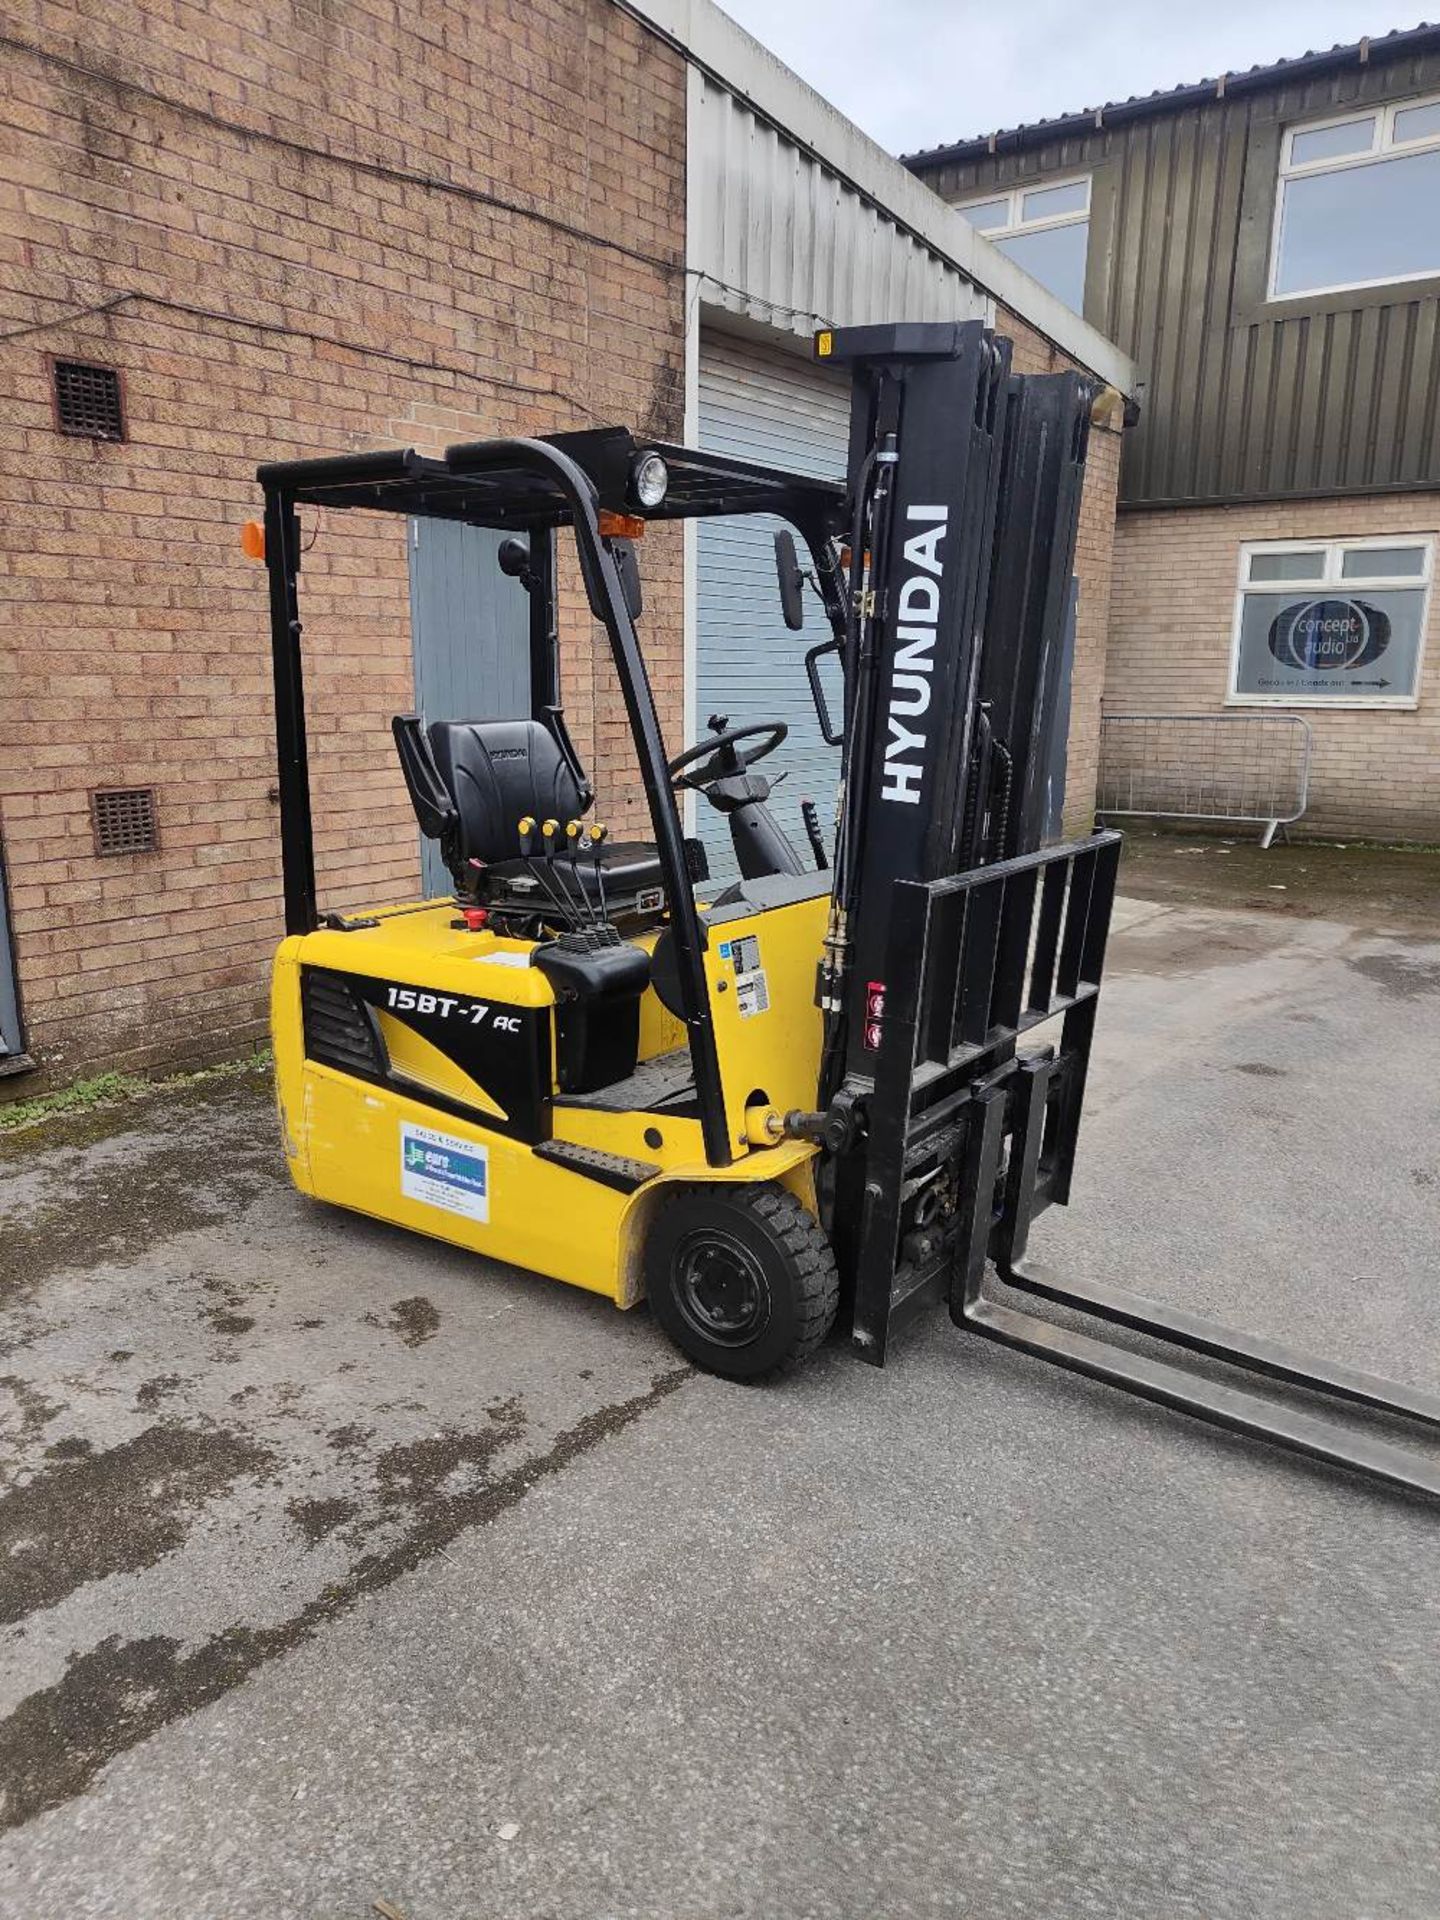 Hyundai 15BT-7 Electric Forklift - Image 6 of 12